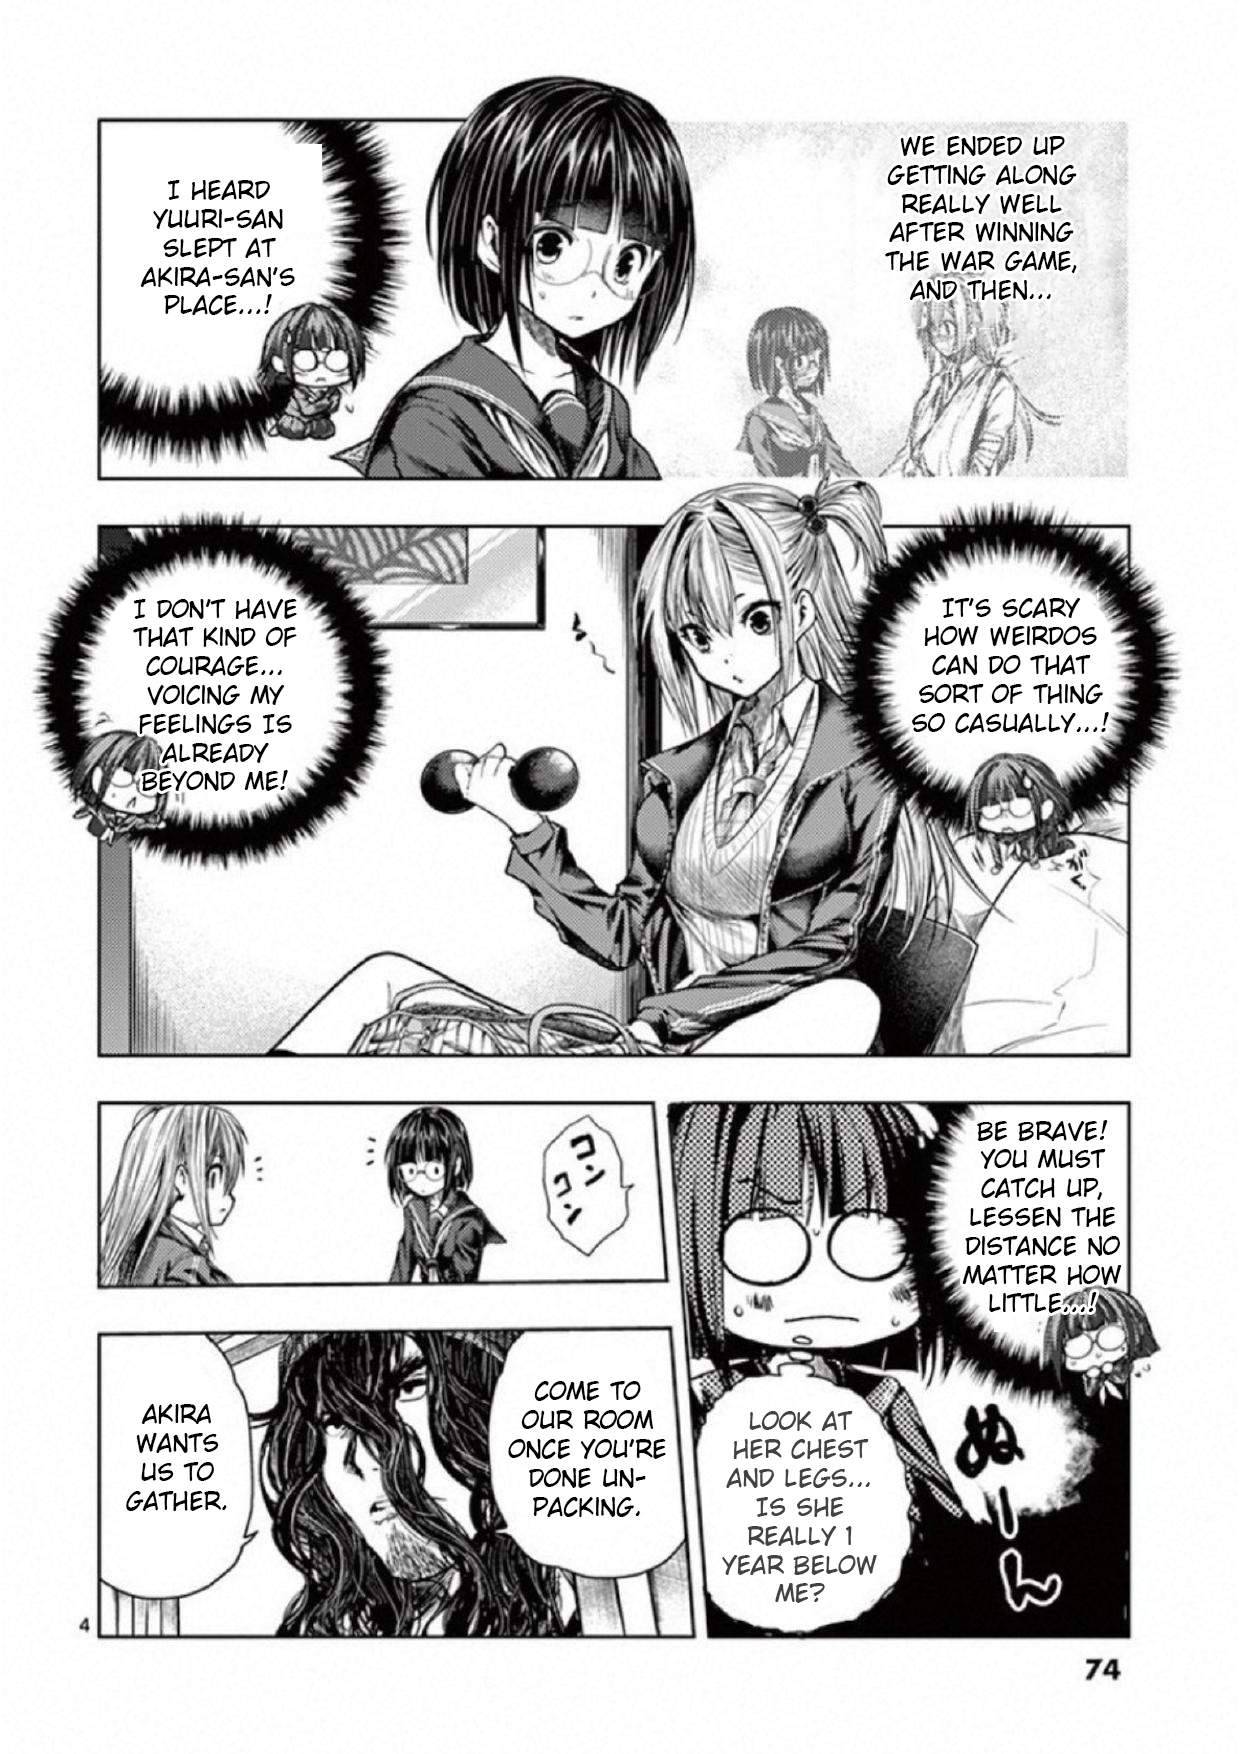 Start Fighting 5 Seconds After Meeting - chapter 77 - #4